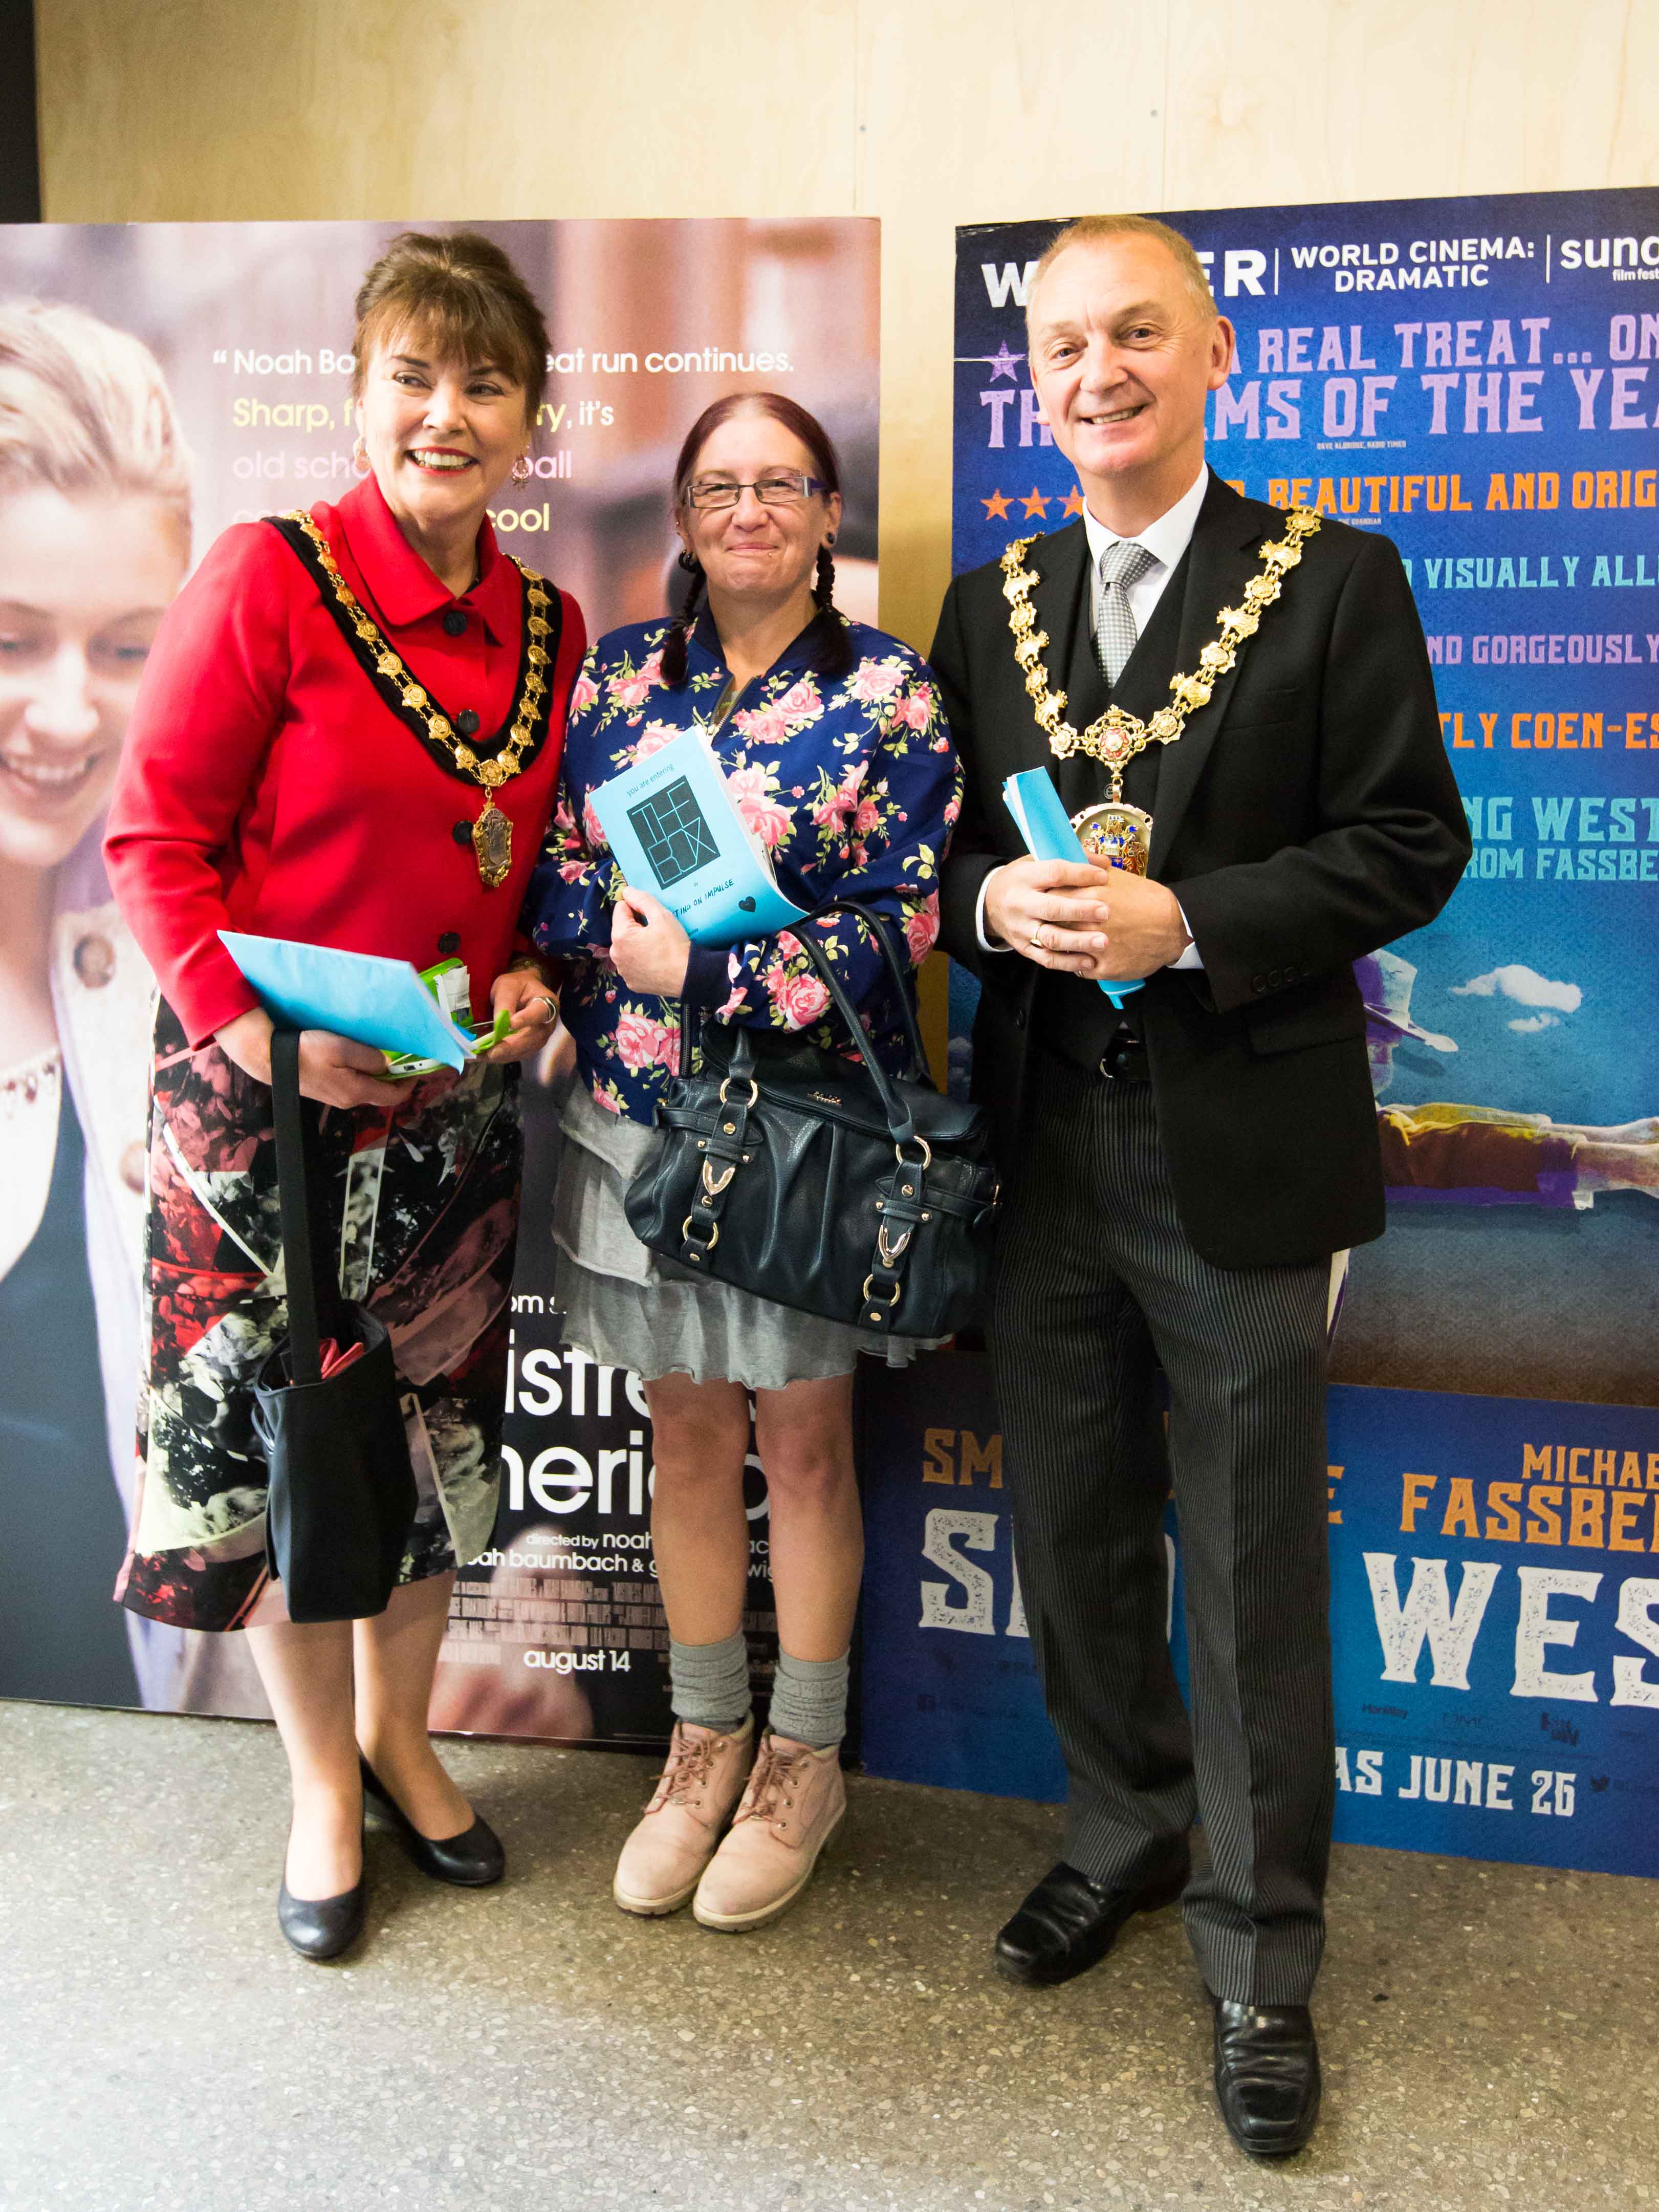 Mayor and Mayoress of Salford with actor Vicky Wilson, photo by Mike Browne